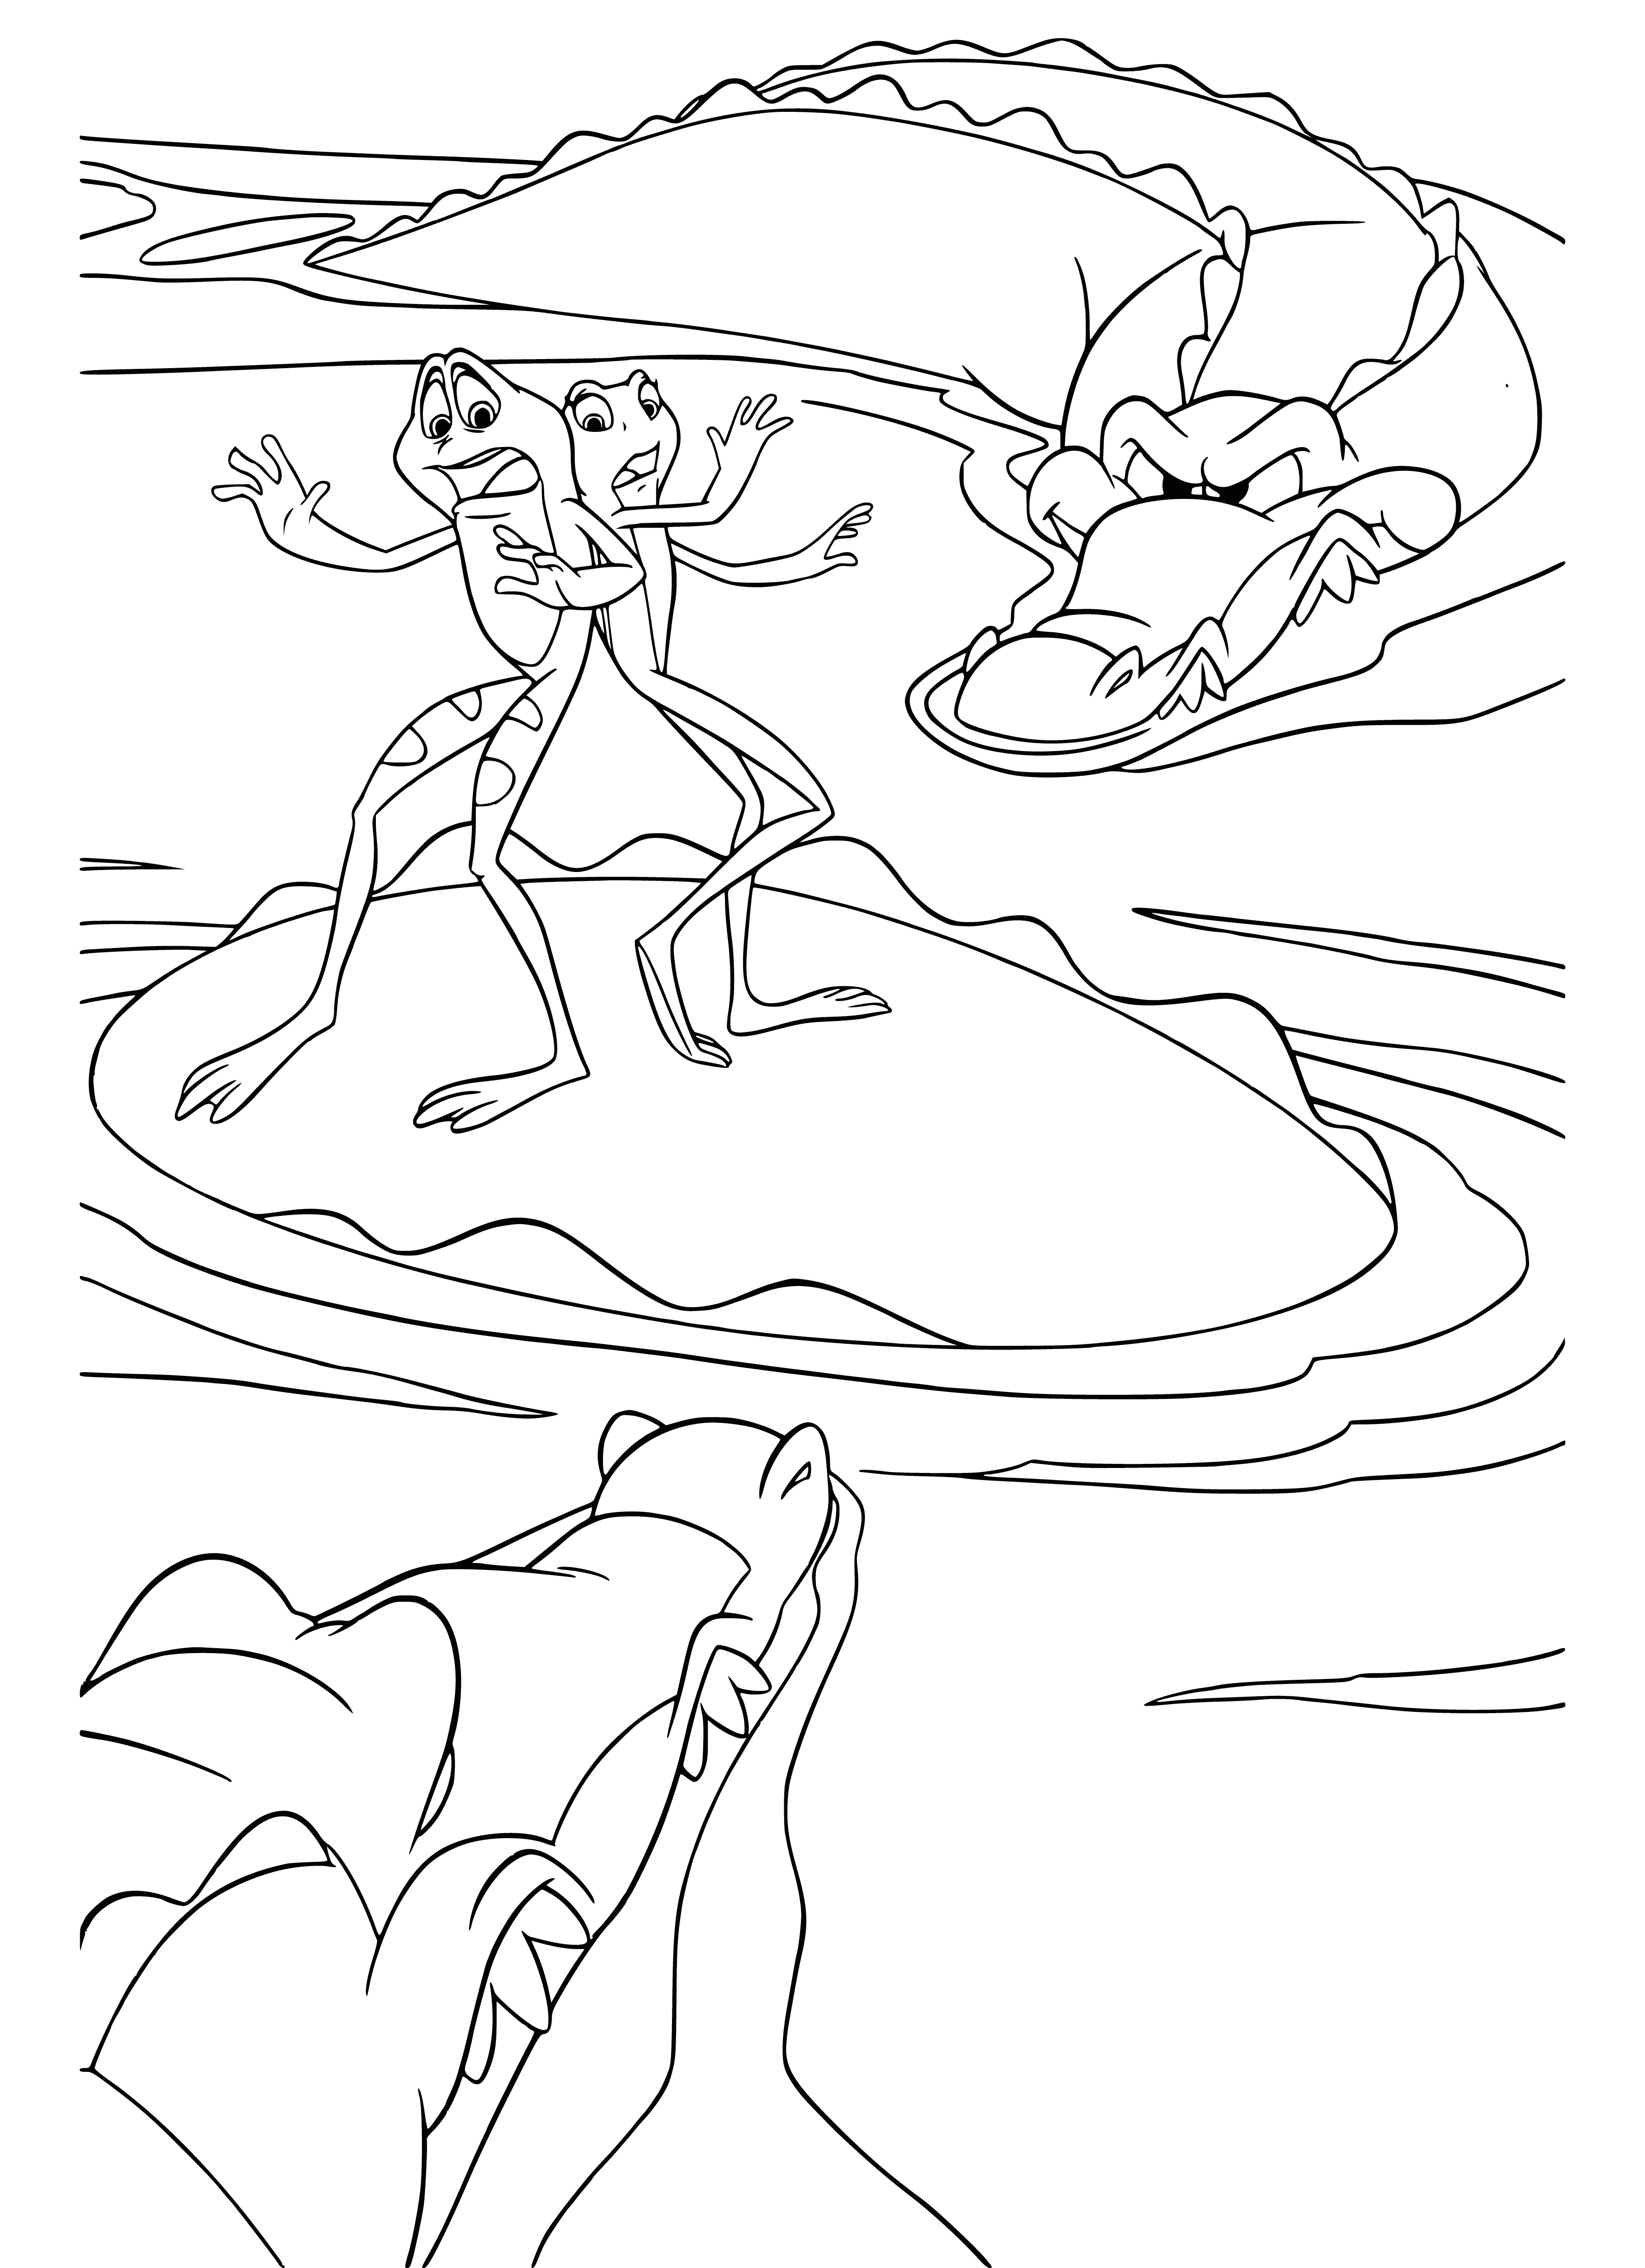 coloring page: Man & woman in car attacked by crocodile, mouth open & ready to bite.